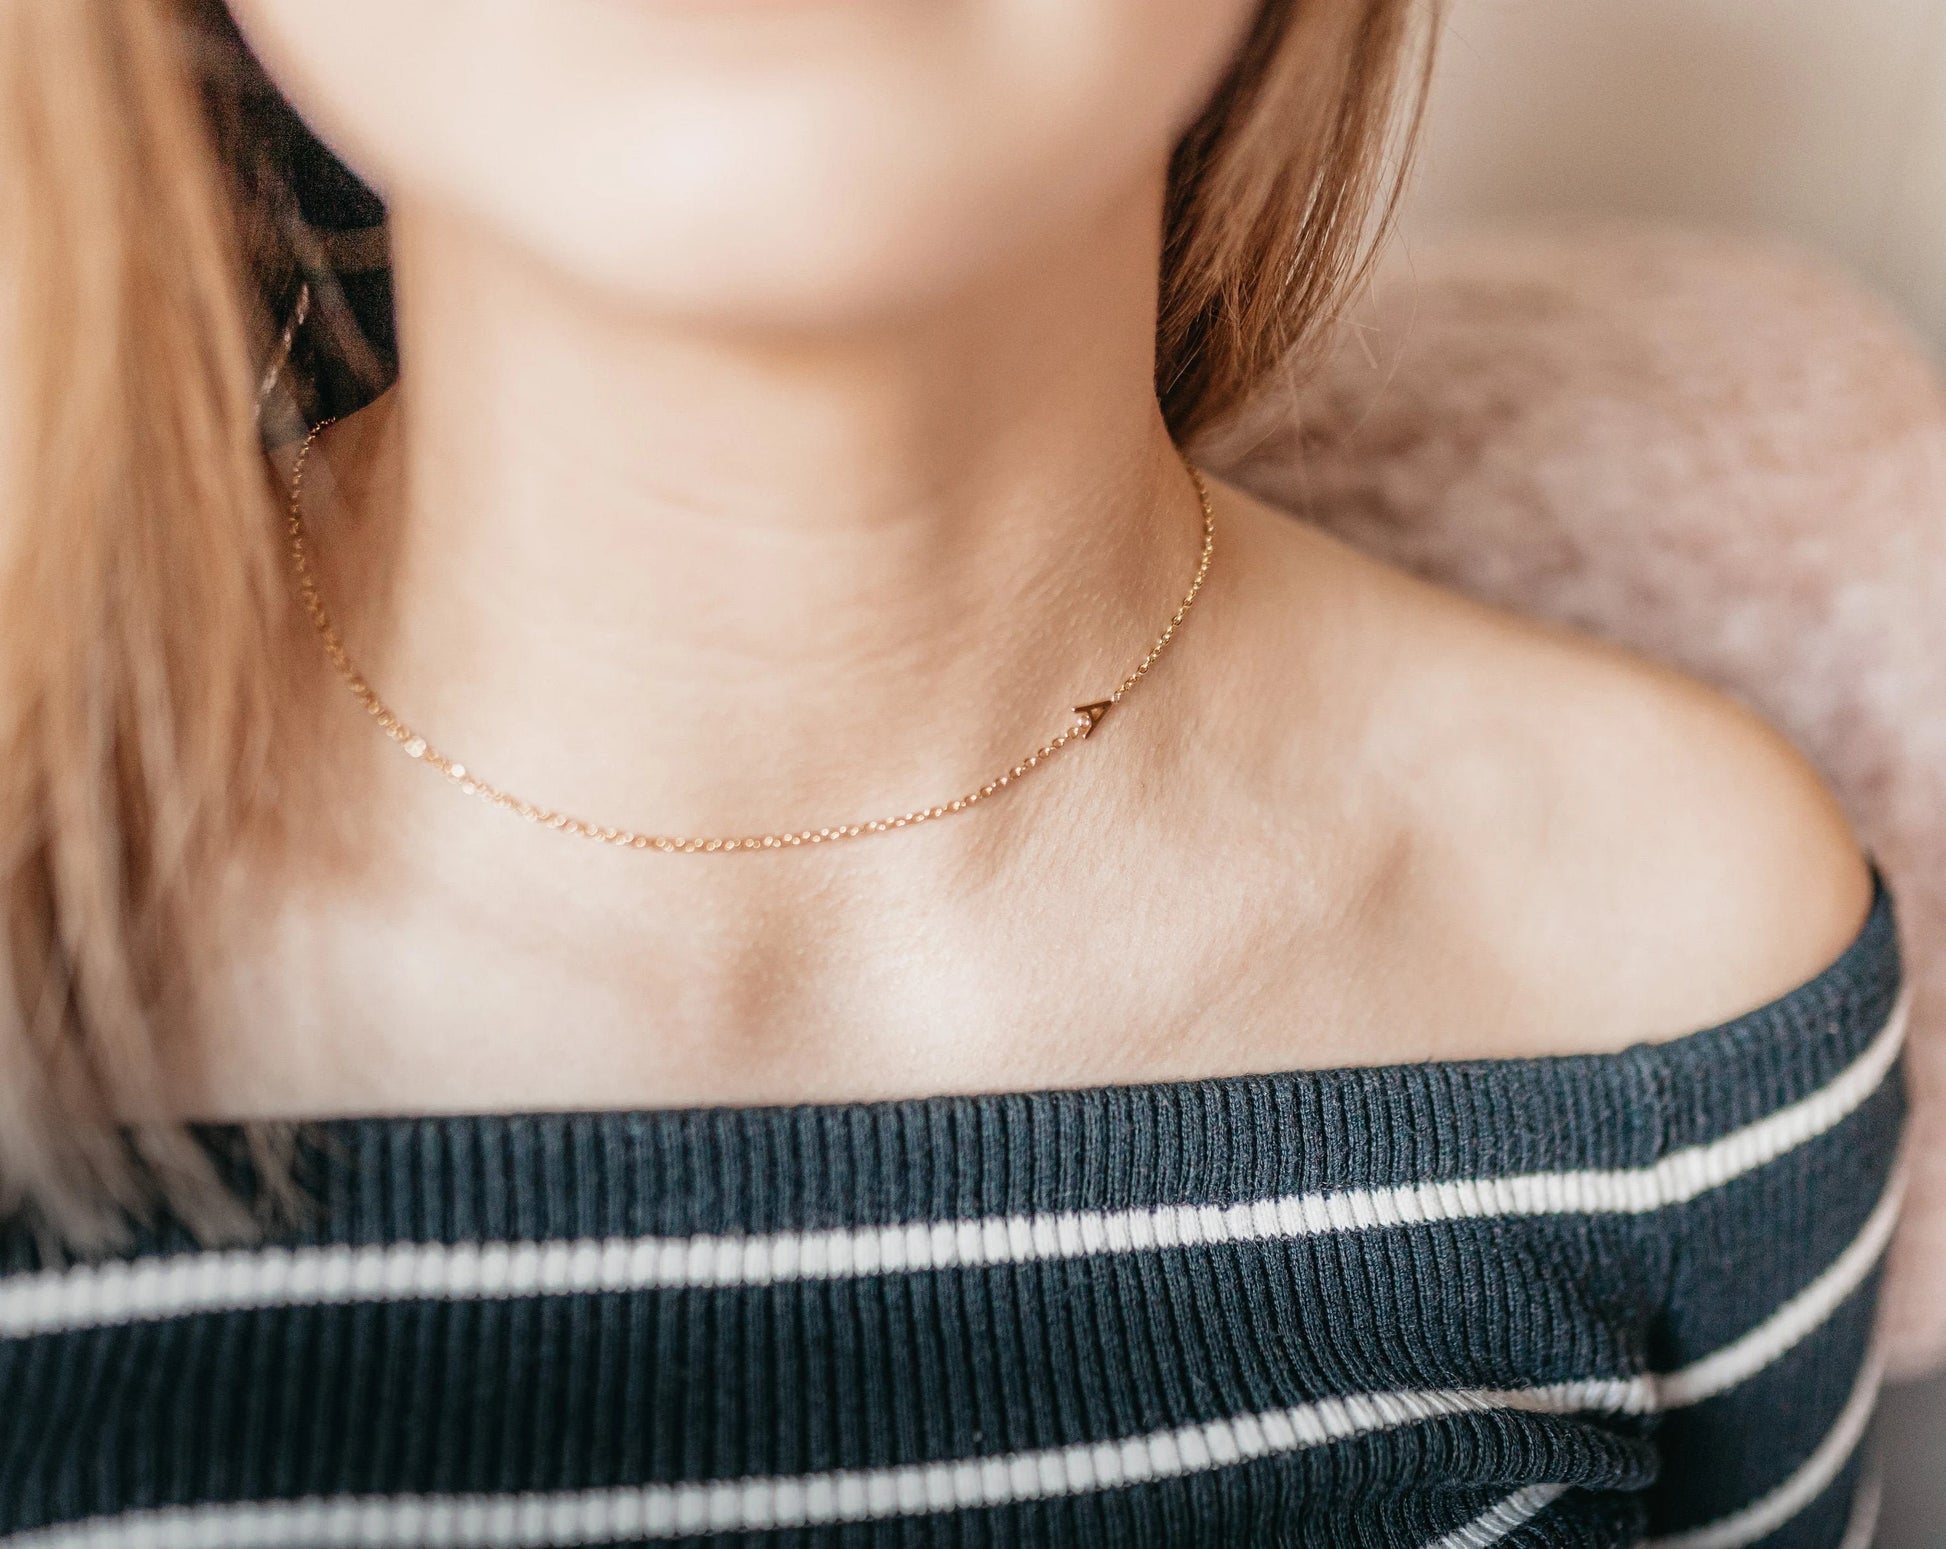 Mini Initial Choker Necklace - Sterling Silver - Sideways Initial Necklace - Dainty Letter Necklace - Birthday Gift for Her - Asymmetrical Necklace